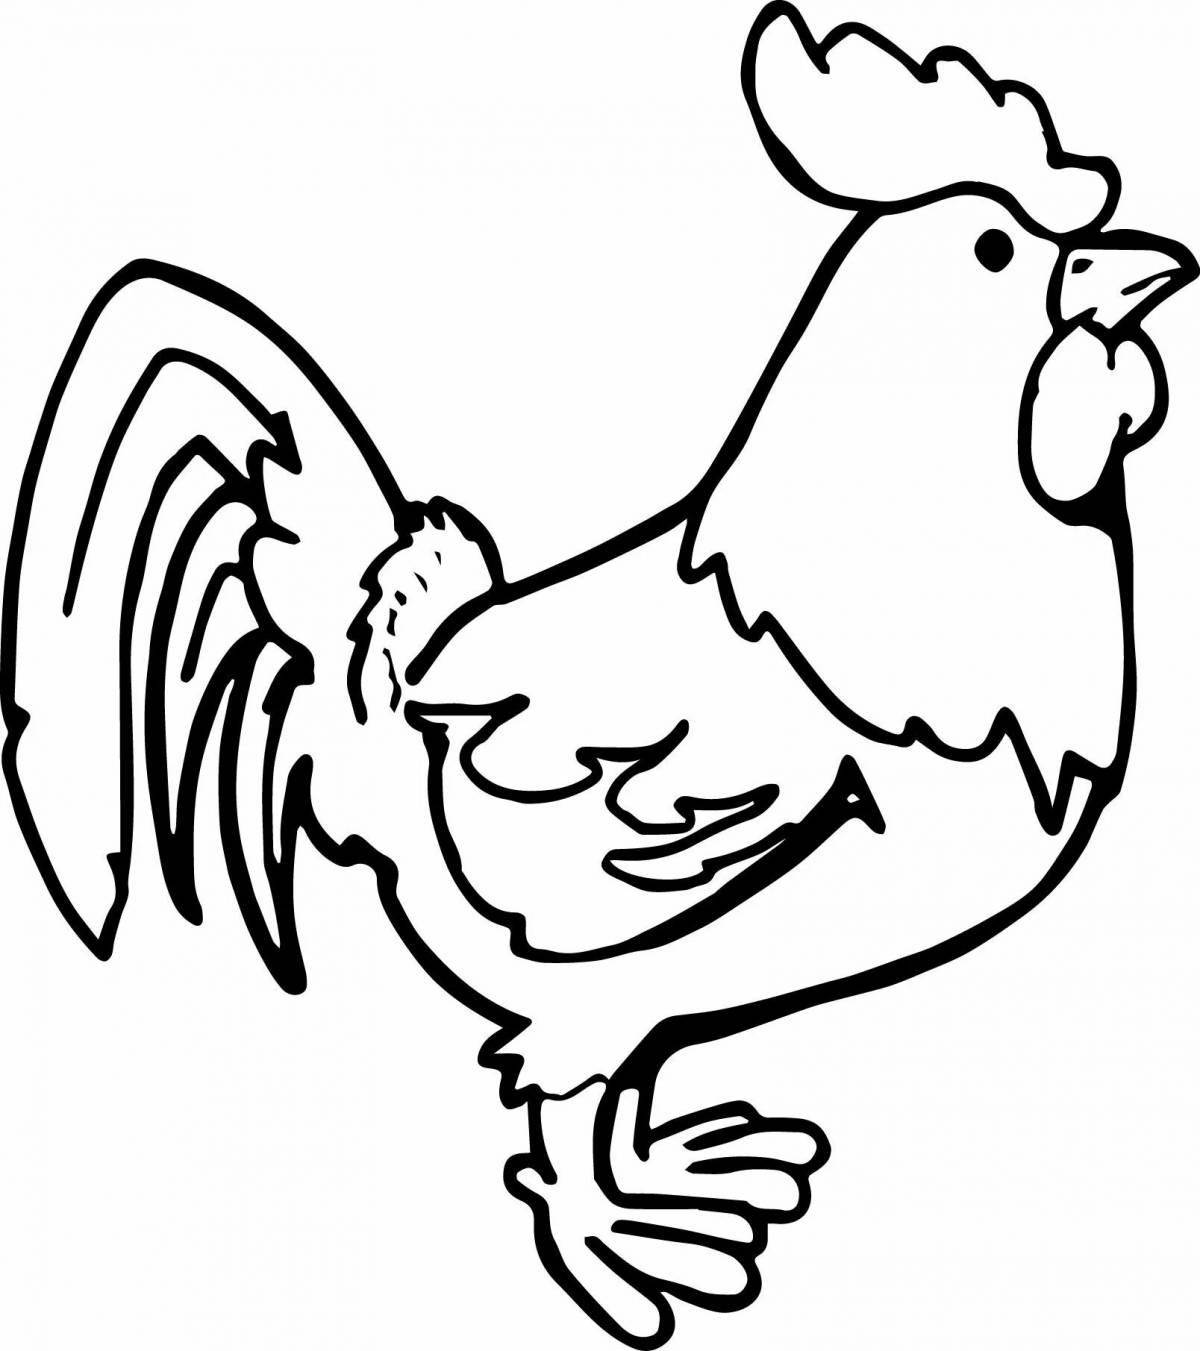 Coloring page charming rooster and hen